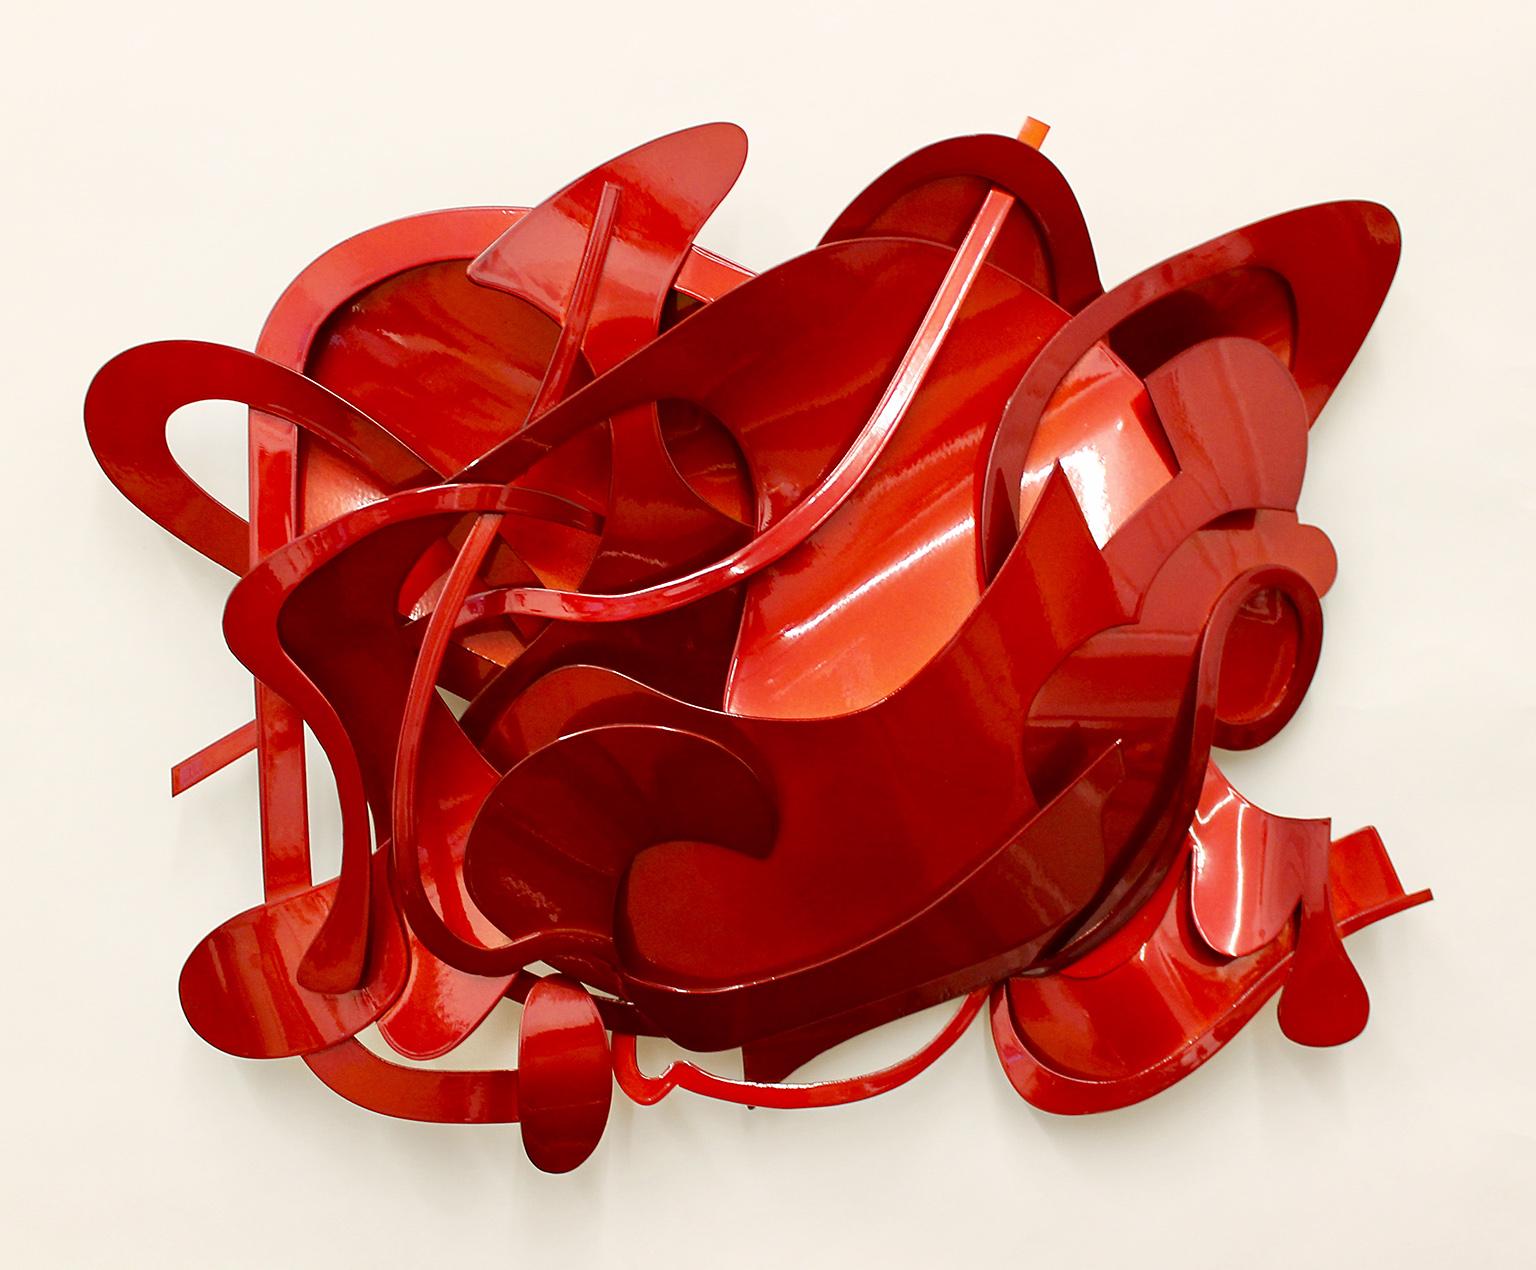 "Red Shoes" by Kevin Barrett
Abstract wall relief sculpture in bronze and red automotive paint

Barrett is noted for creating contemporary metal sculpture and sculpture wall pieces for indoor and outdoor display.

Wall Art, Wall Relief Sculpture,